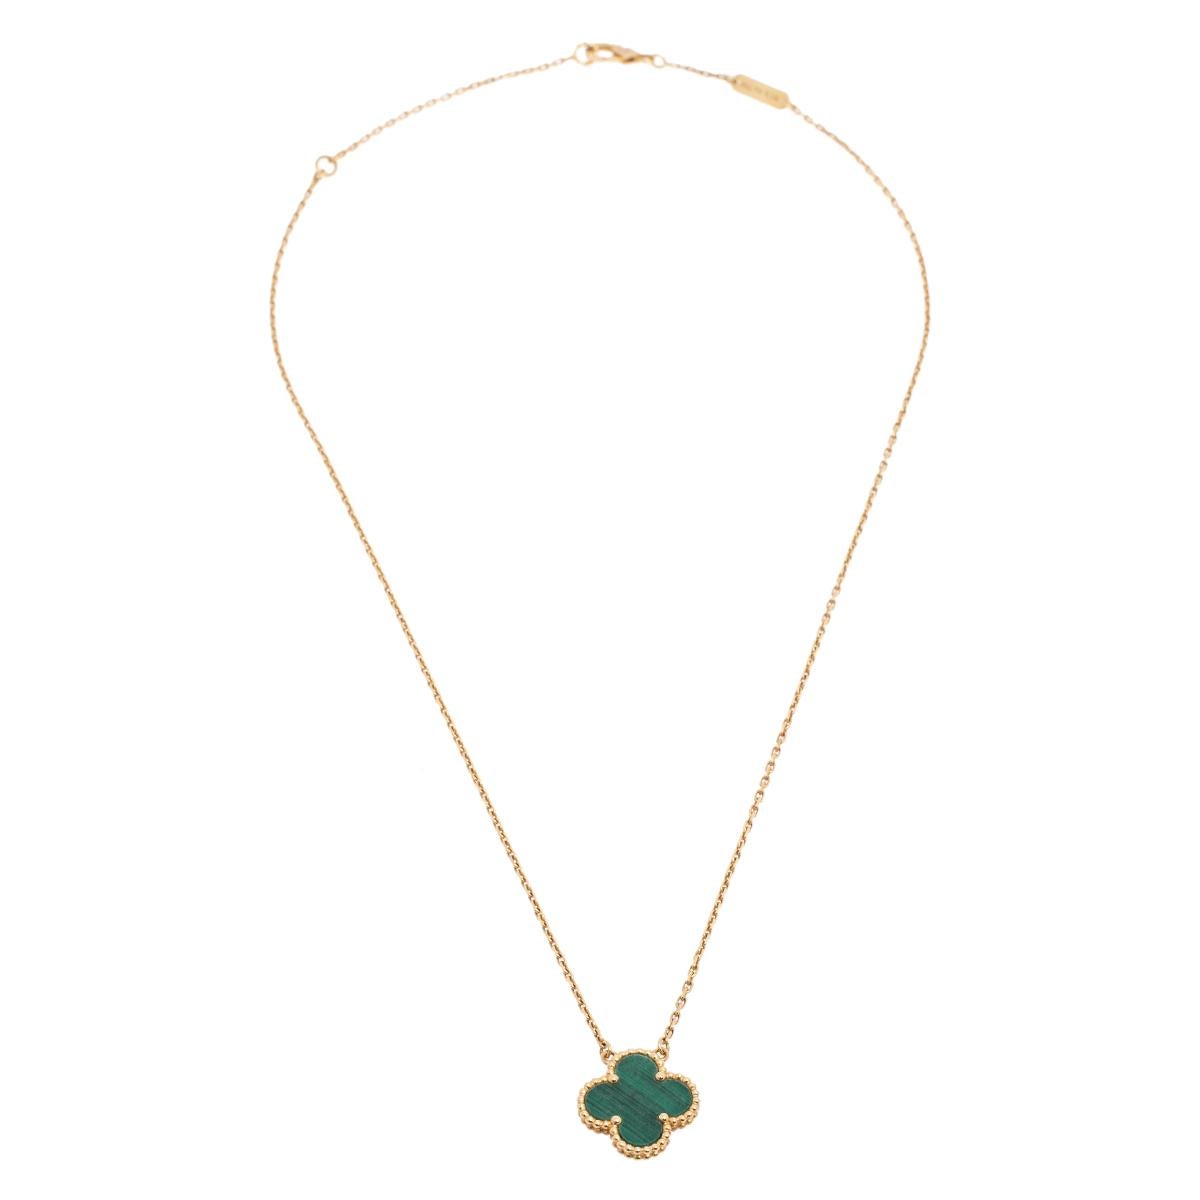 Van Cleef & Arpels’ Alhambra jewel was first created in 1968, and the Vintage Alhambra creations remain faithful to its timeless elegance. The iconic clover motif is a potent symbol of luck and comes adorned with signature bead setting on the